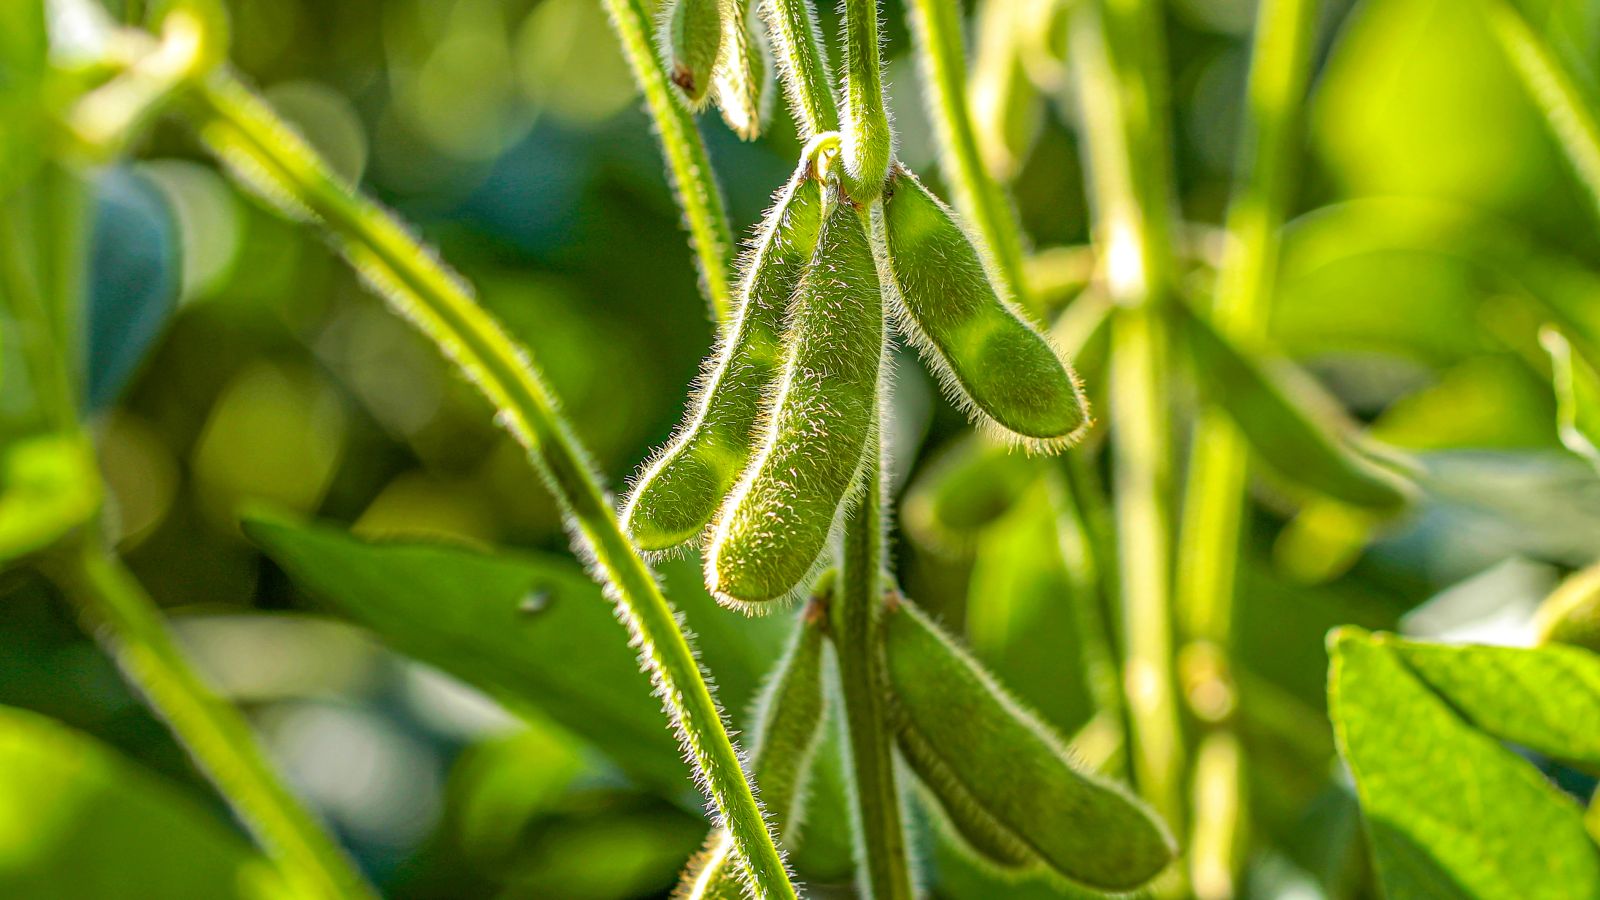 Soybean pods on plant by Mailson Pignata via iStock